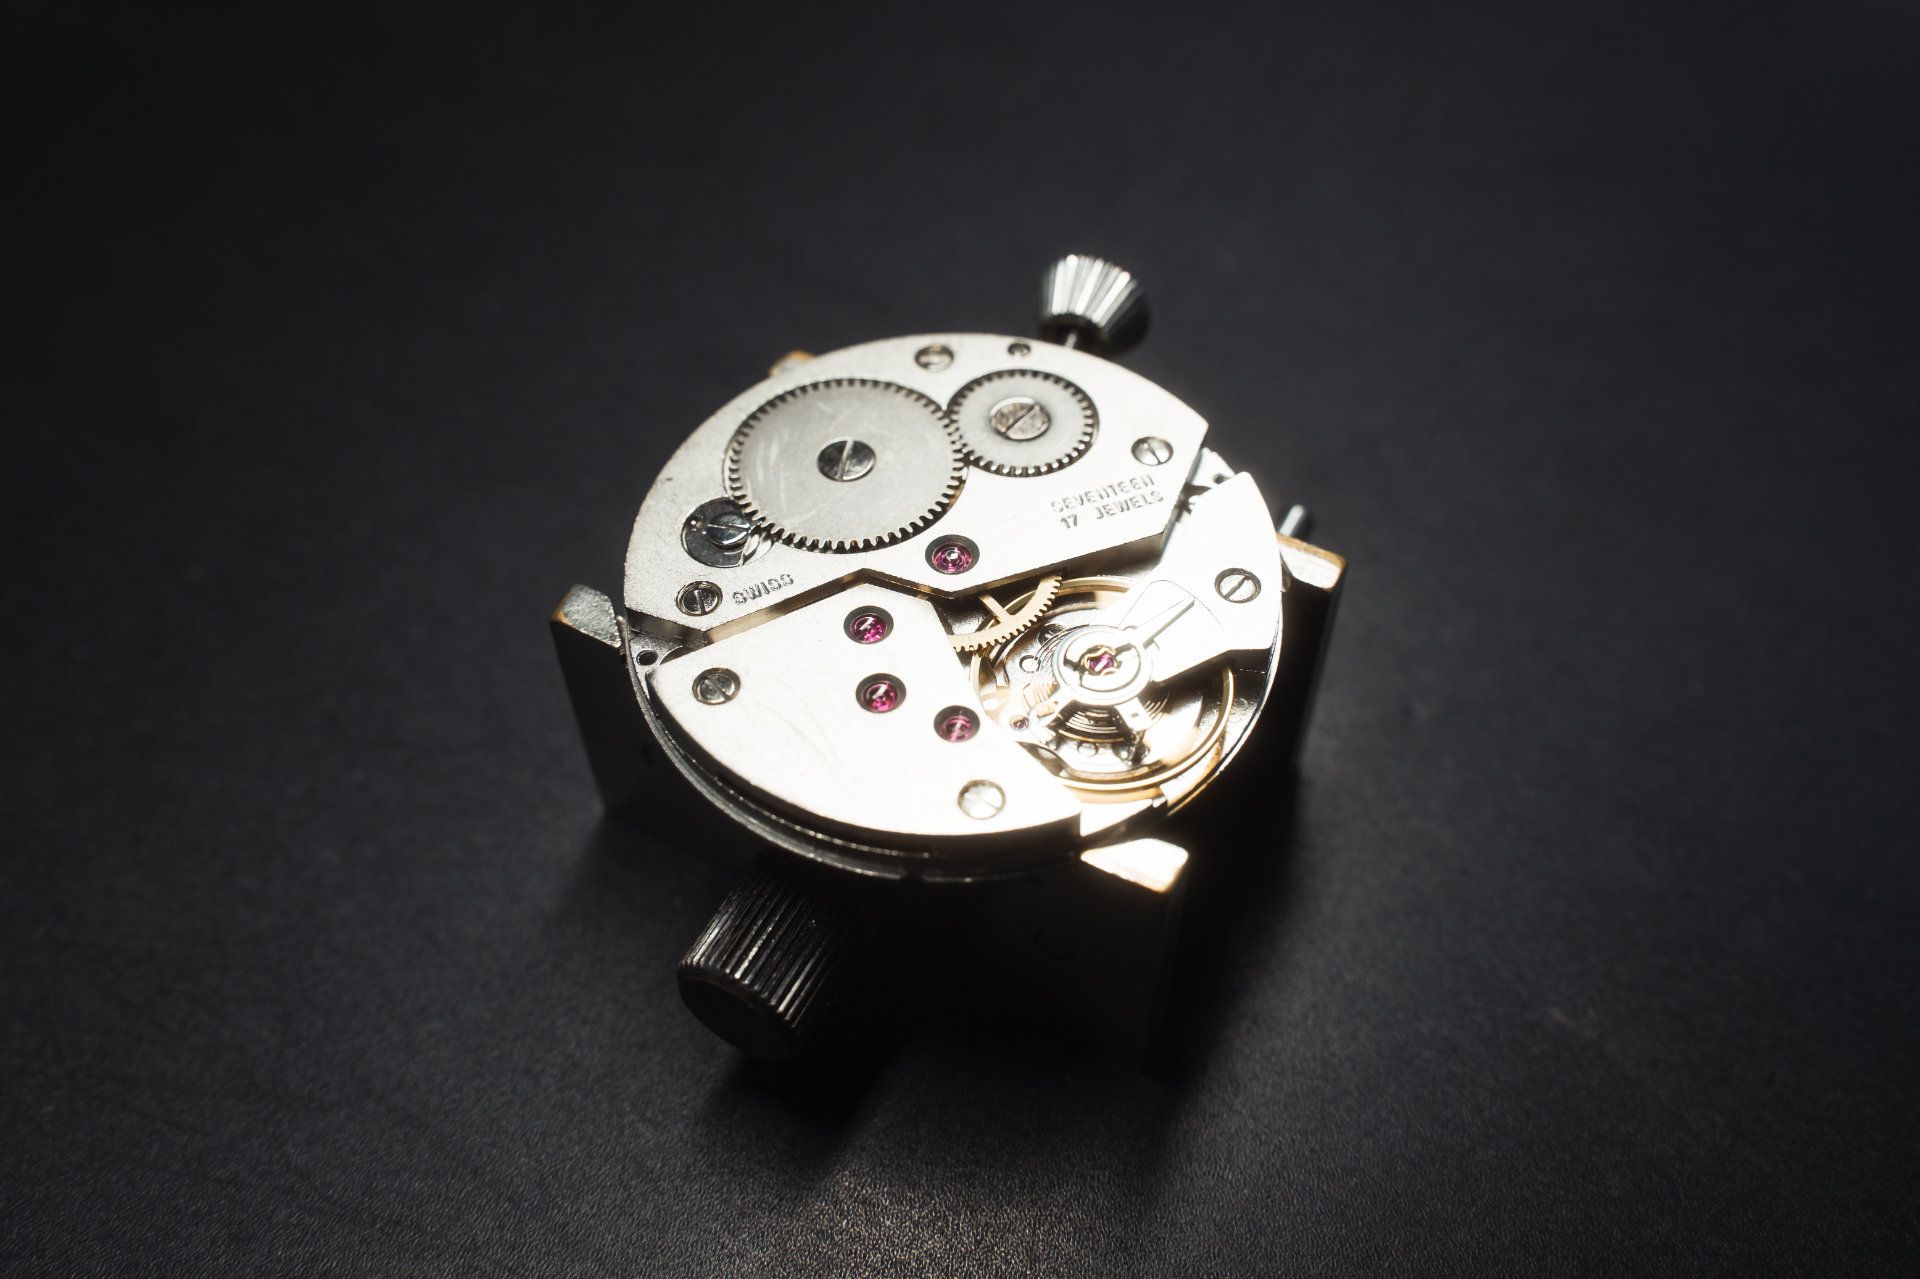 Intricate watch movement on a dark surface, showcasing the precision engineering of horology.